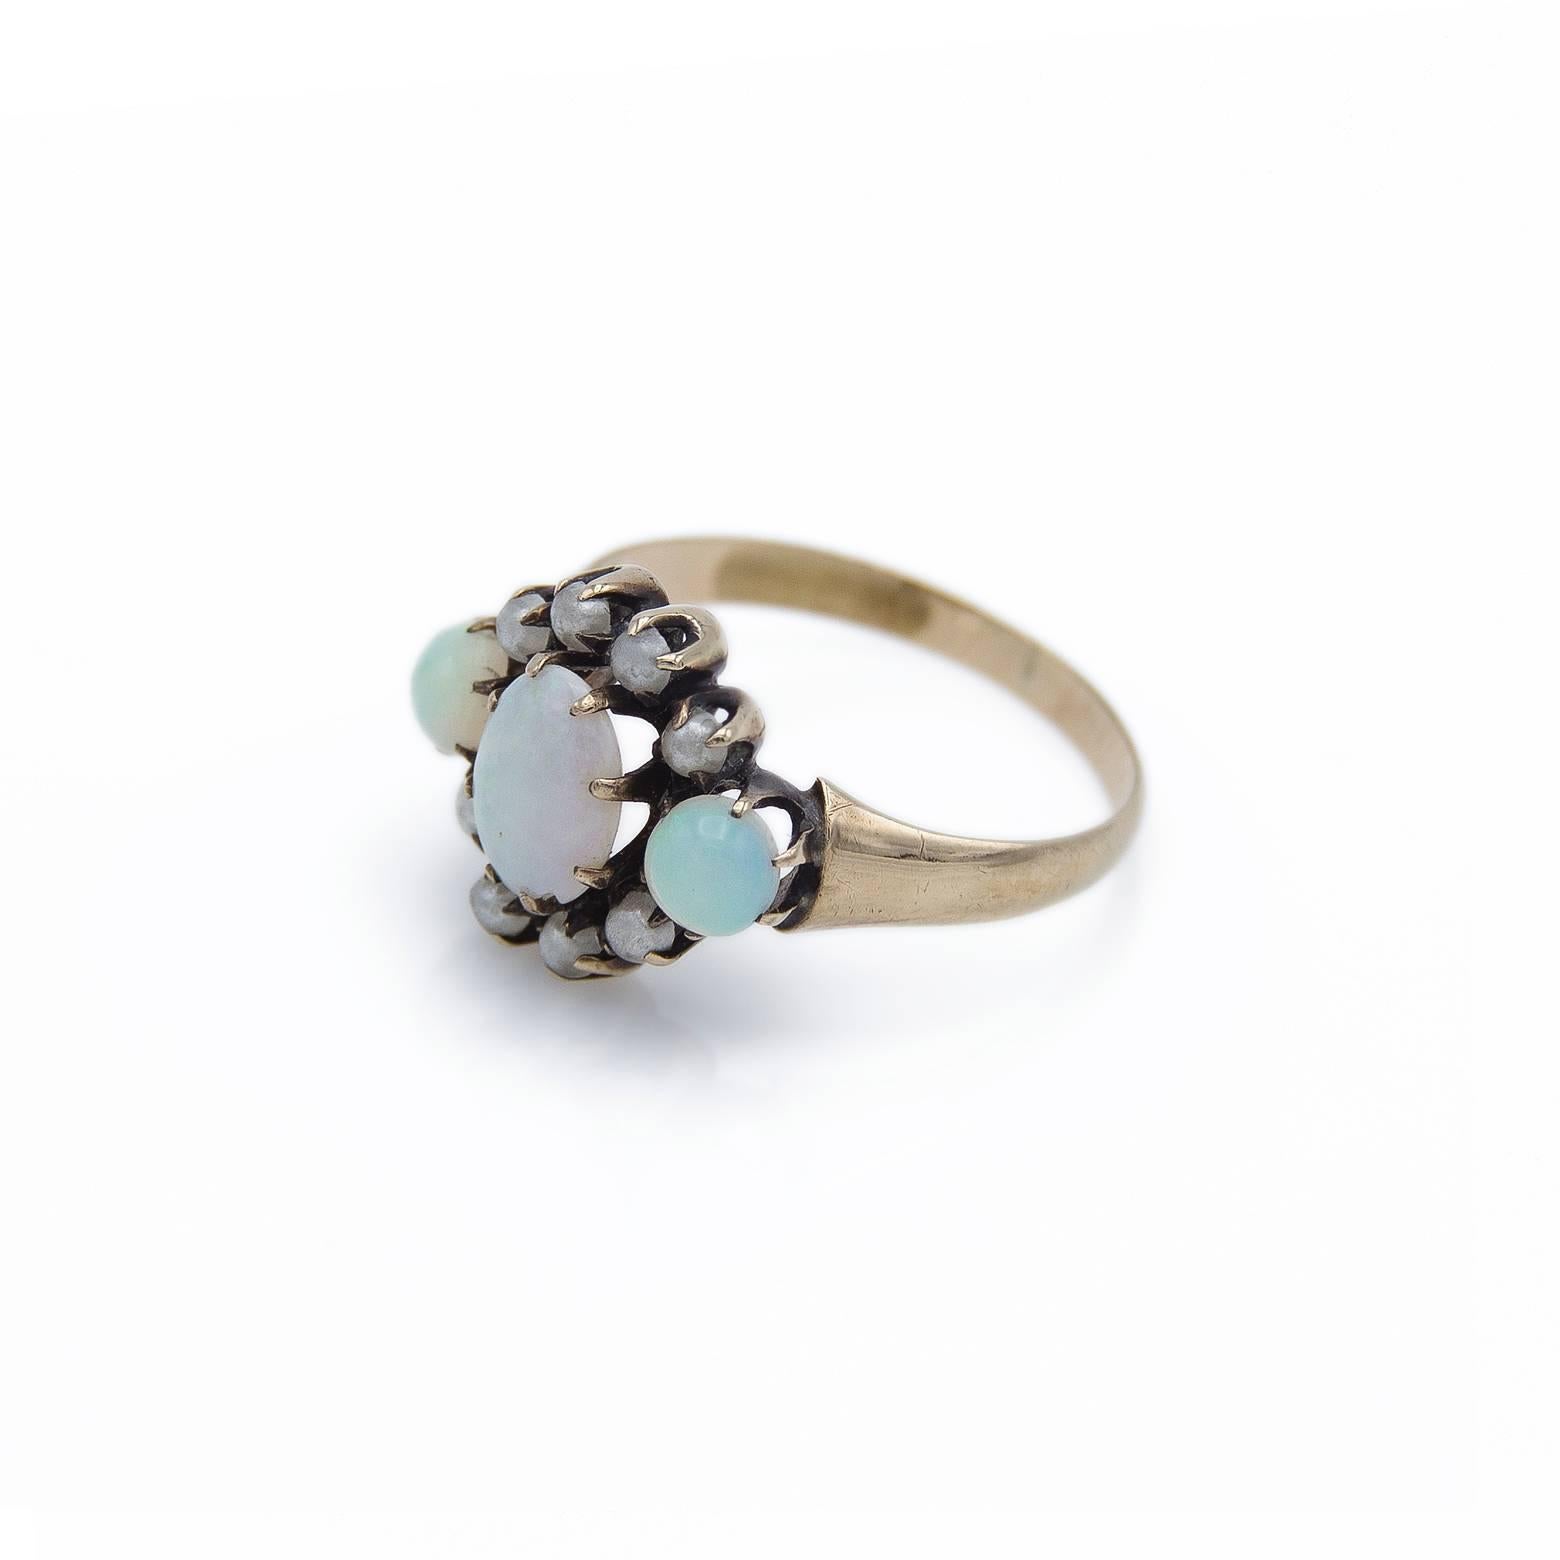 Antique and Artisan Art Nouveau Opal and Natural Pearl Ring. This ring is elegant and austere with bright glittery opal centerpiece and glowing opals on the sides. The natural pearls on the top and bottom give it the classical flower shape